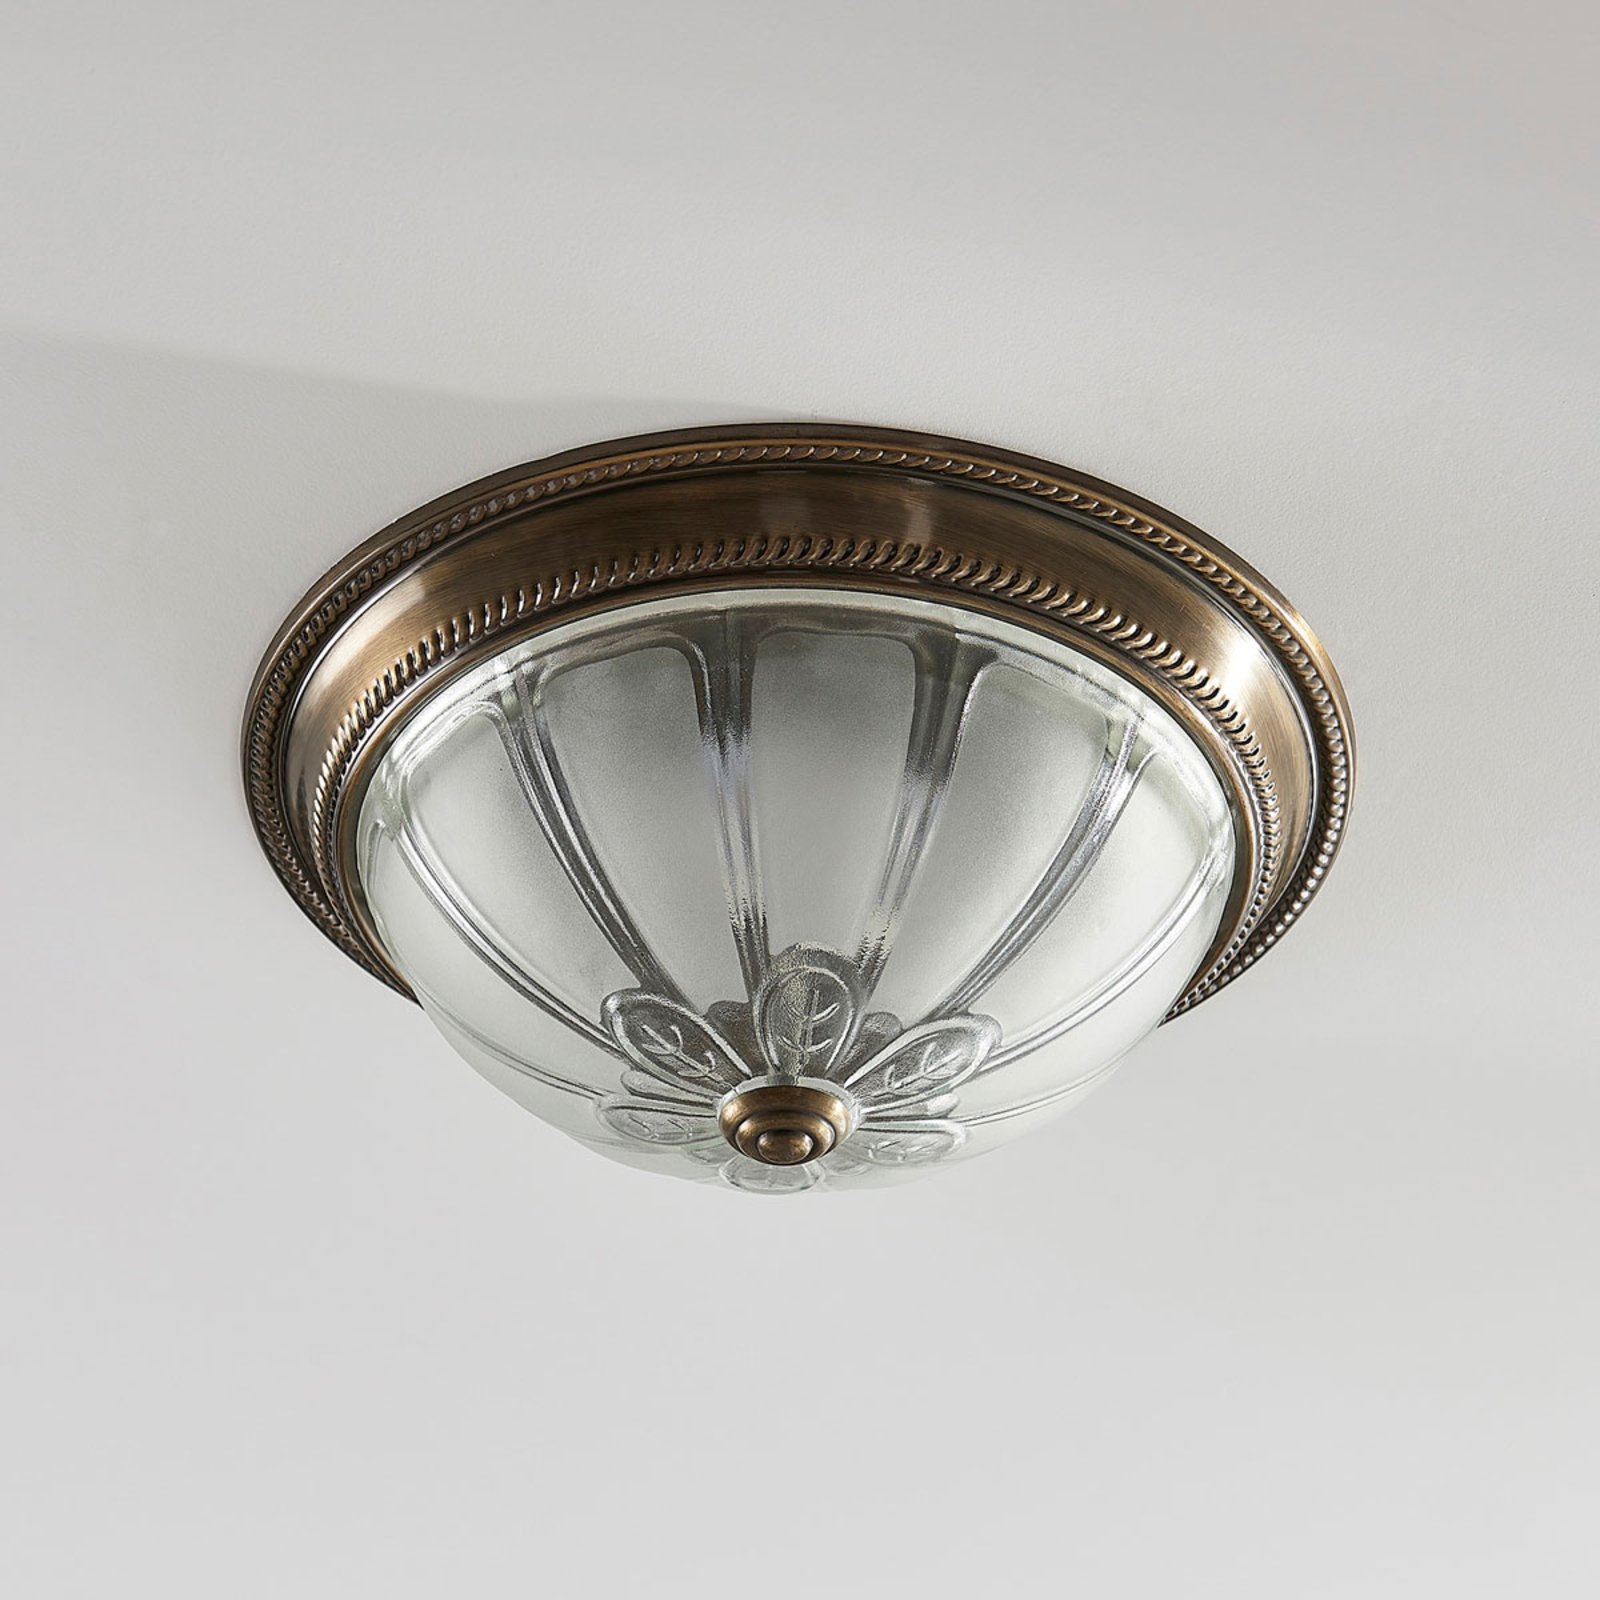 Round LED ceiling light Henja, 3-stage dimmable